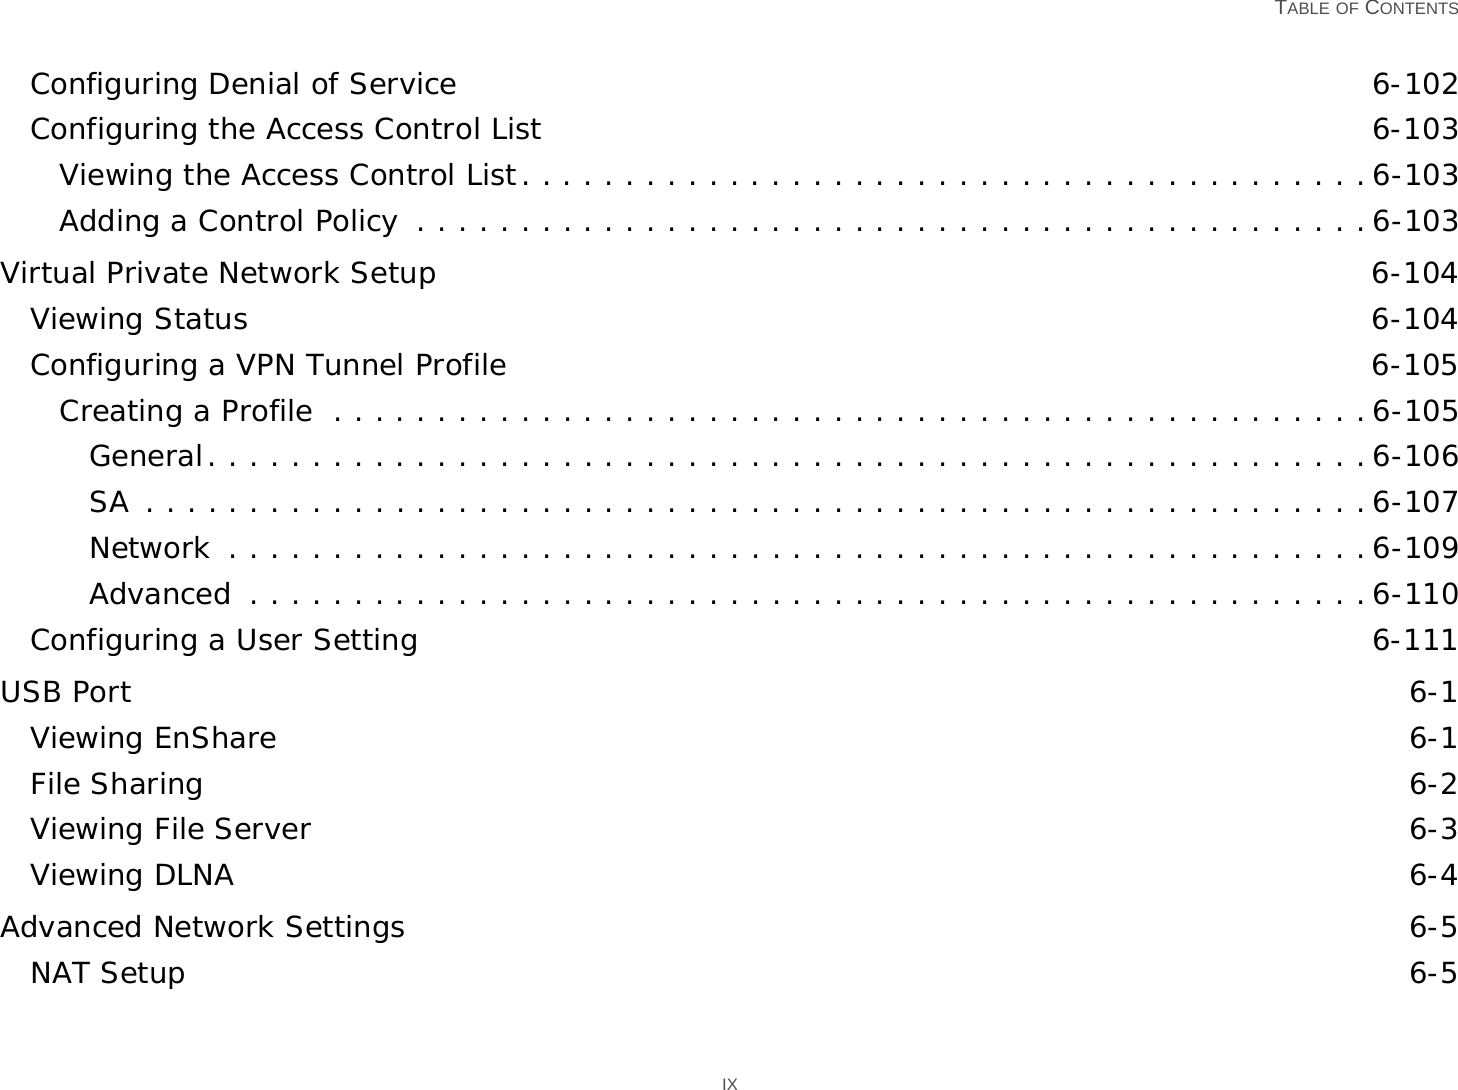   TABLE OF CONTENTS IXConfiguring Denial of Service 6-102Configuring the Access Control List 6-103Viewing the Access Control List. . . . . . . . . . . . . . . . . . . . . . . . . . . . . . . . . . . . . . . . .6-103Adding a Control Policy  . . . . . . . . . . . . . . . . . . . . . . . . . . . . . . . . . . . . . . . . . . . . . .6-103Virtual Private Network Setup 6-104Viewing Status 6-104Configuring a VPN Tunnel Profile 6-105Creating a Profile  . . . . . . . . . . . . . . . . . . . . . . . . . . . . . . . . . . . . . . . . . . . . . . . . . .6-105General. . . . . . . . . . . . . . . . . . . . . . . . . . . . . . . . . . . . . . . . . . . . . . . . . . . . . . . .6-106SA . . . . . . . . . . . . . . . . . . . . . . . . . . . . . . . . . . . . . . . . . . . . . . . . . . . . . . . . . . .6-107Network  . . . . . . . . . . . . . . . . . . . . . . . . . . . . . . . . . . . . . . . . . . . . . . . . . . . . . . .6-109Advanced  . . . . . . . . . . . . . . . . . . . . . . . . . . . . . . . . . . . . . . . . . . . . . . . . . . . . . .6-110Configuring a User Setting 6-111USB Port 6-1Viewing EnShare 6-1File Sharing 6-2Viewing File Server 6-3Viewing DLNA 6-4Advanced Network Settings 6-5NAT Setup 6-5